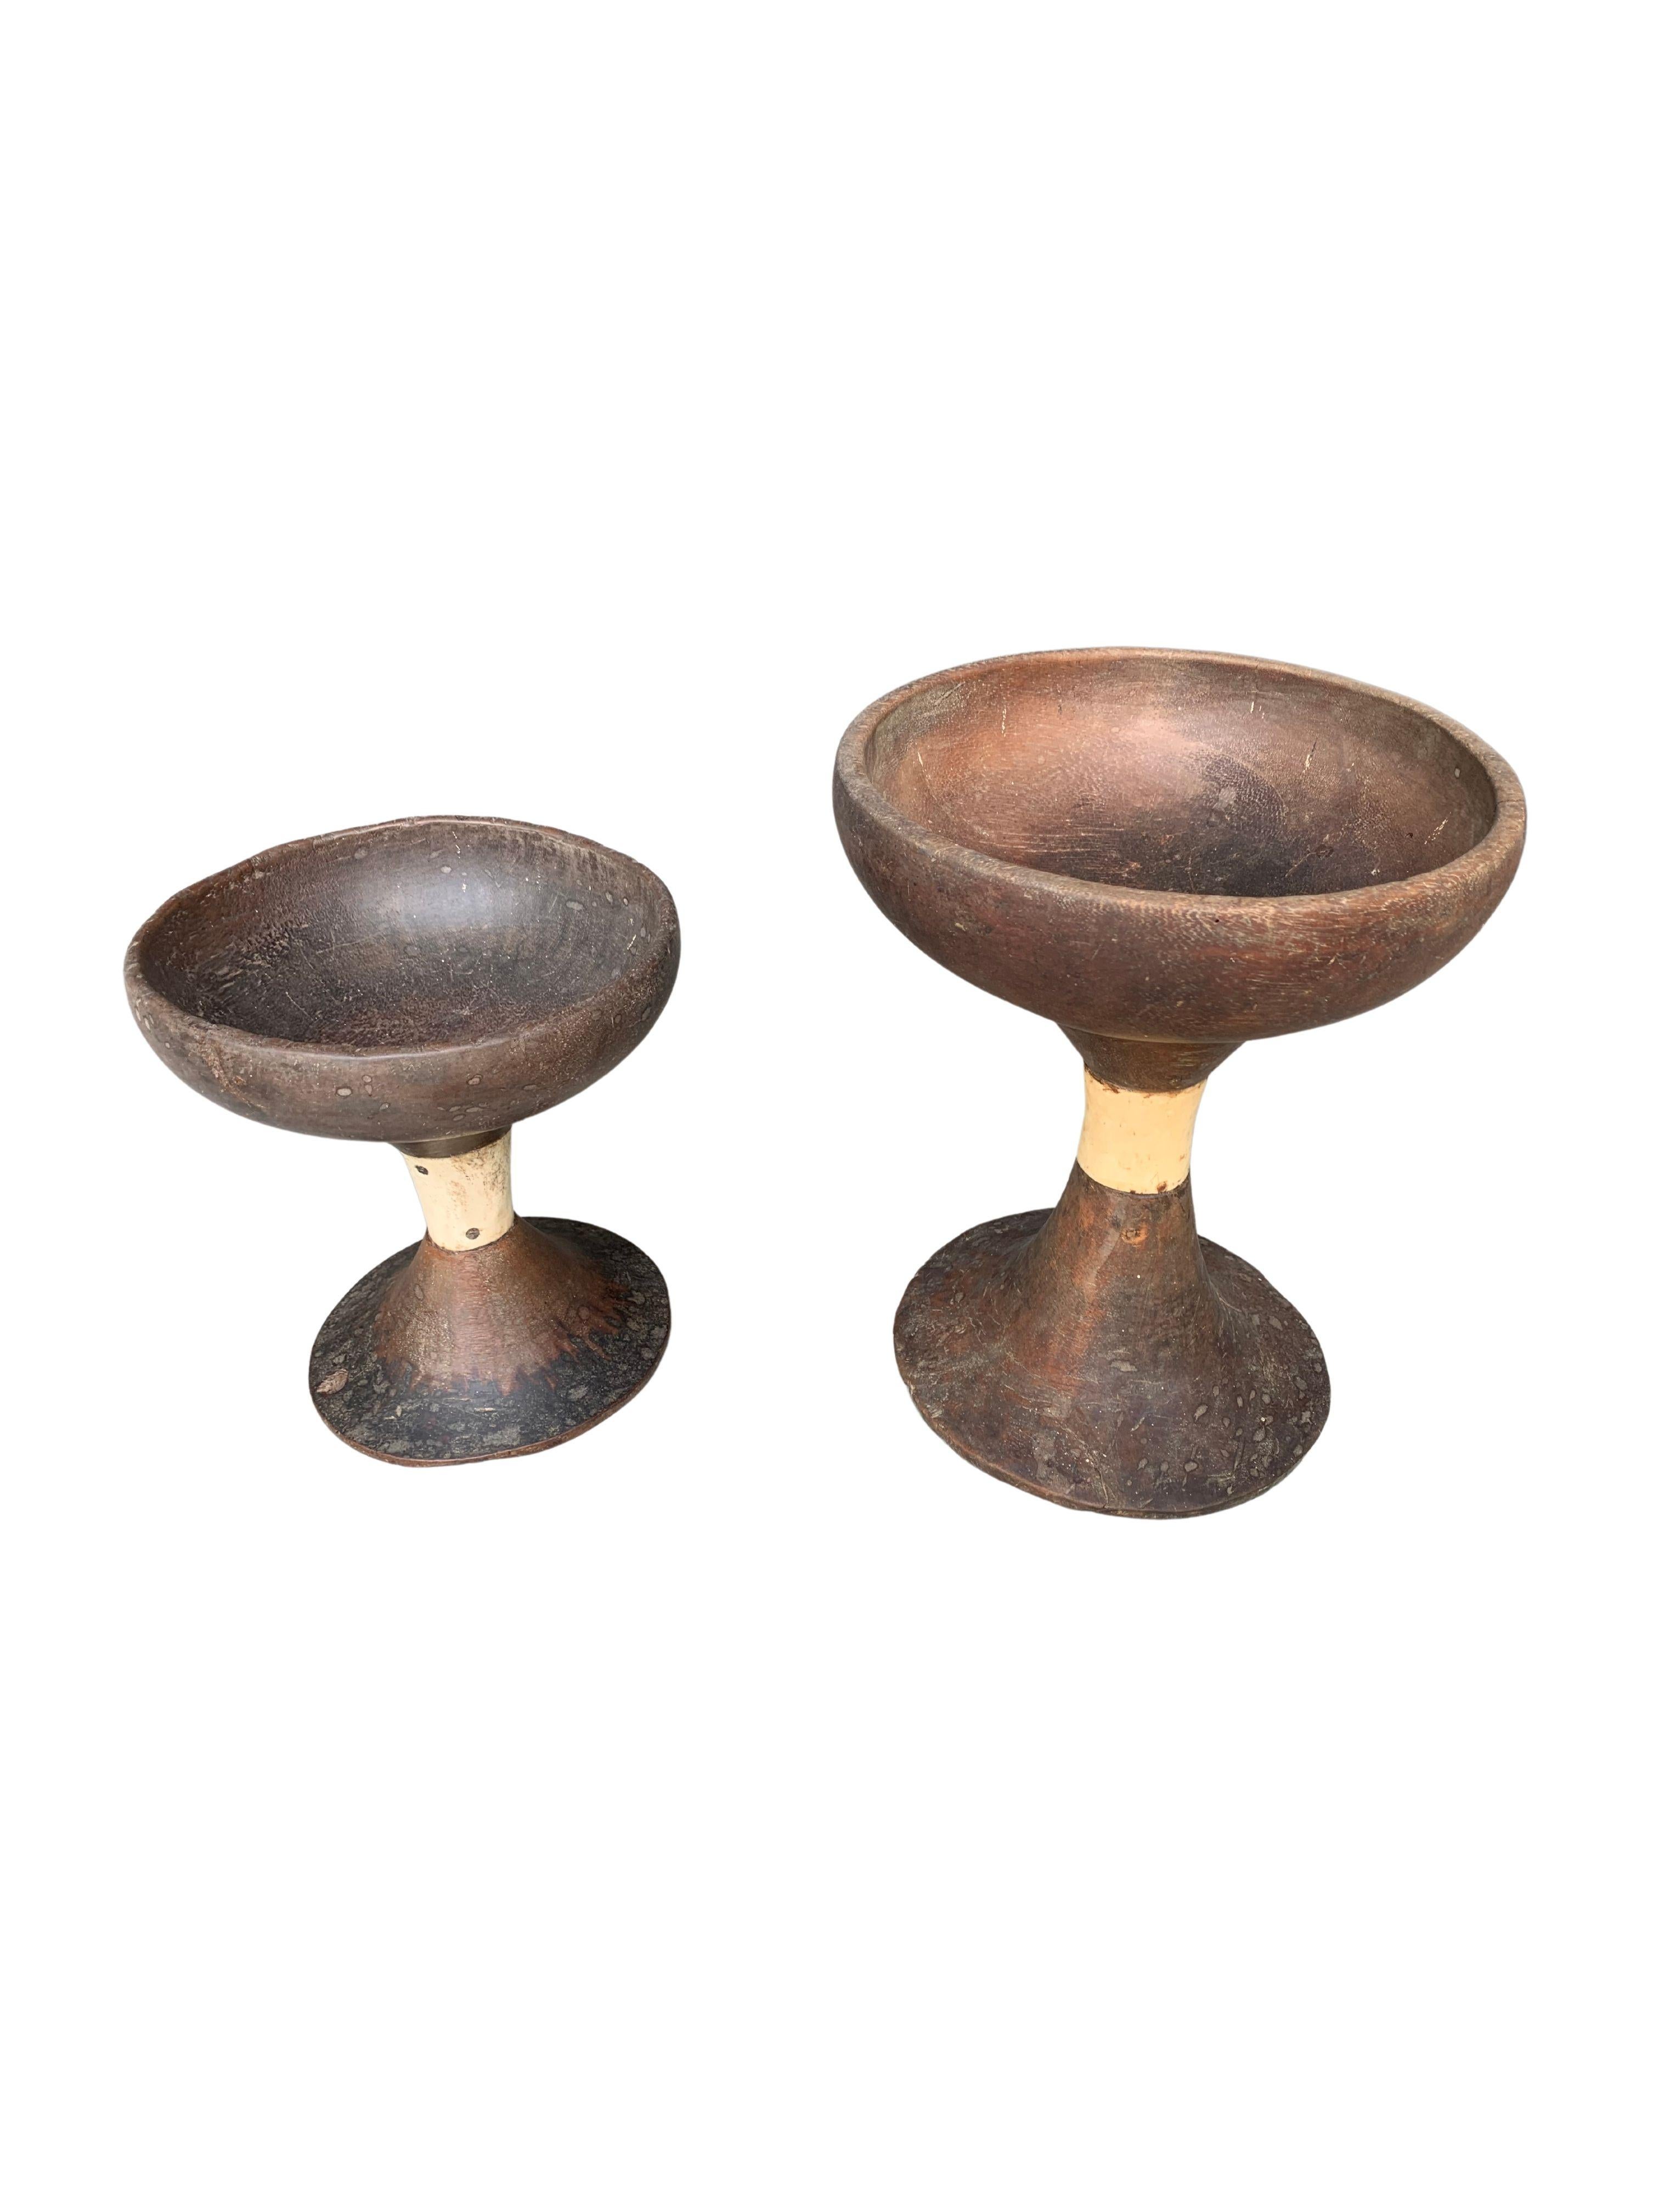 This set of wooden ceremonial bowls were crafted by the Toraja tribes people on the mountain highlands of Sulawesi, Indonesia. They are hand-crafted using 3 separate components (the base, middle and upper bowl) that are then joined together. It has